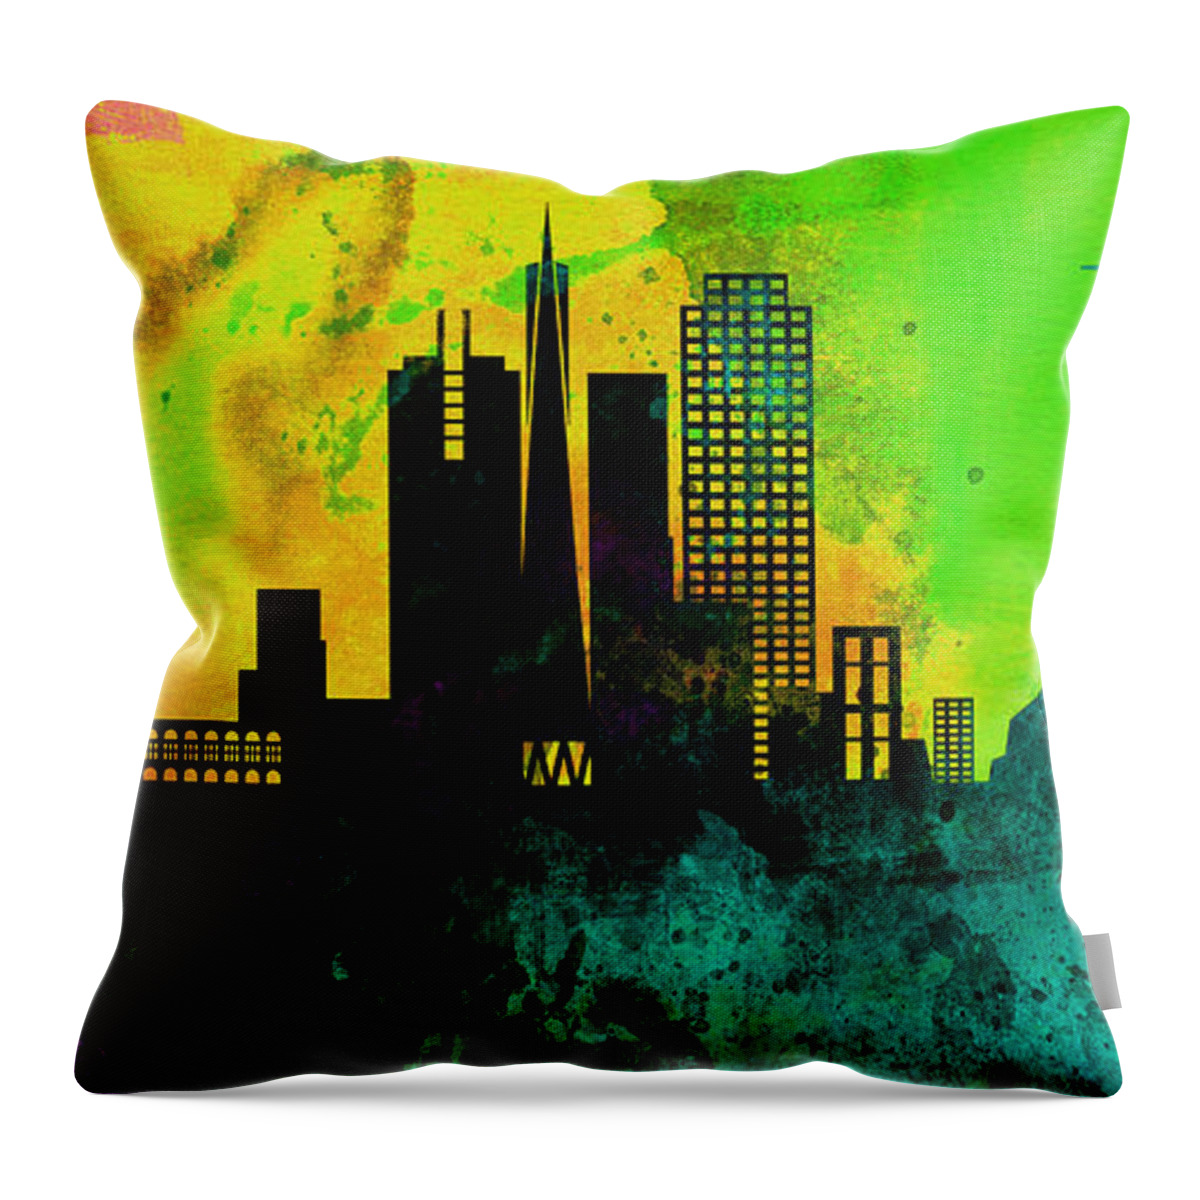 San Francisco Throw Pillow featuring the painting San Francisco City Skyline by Naxart Studio